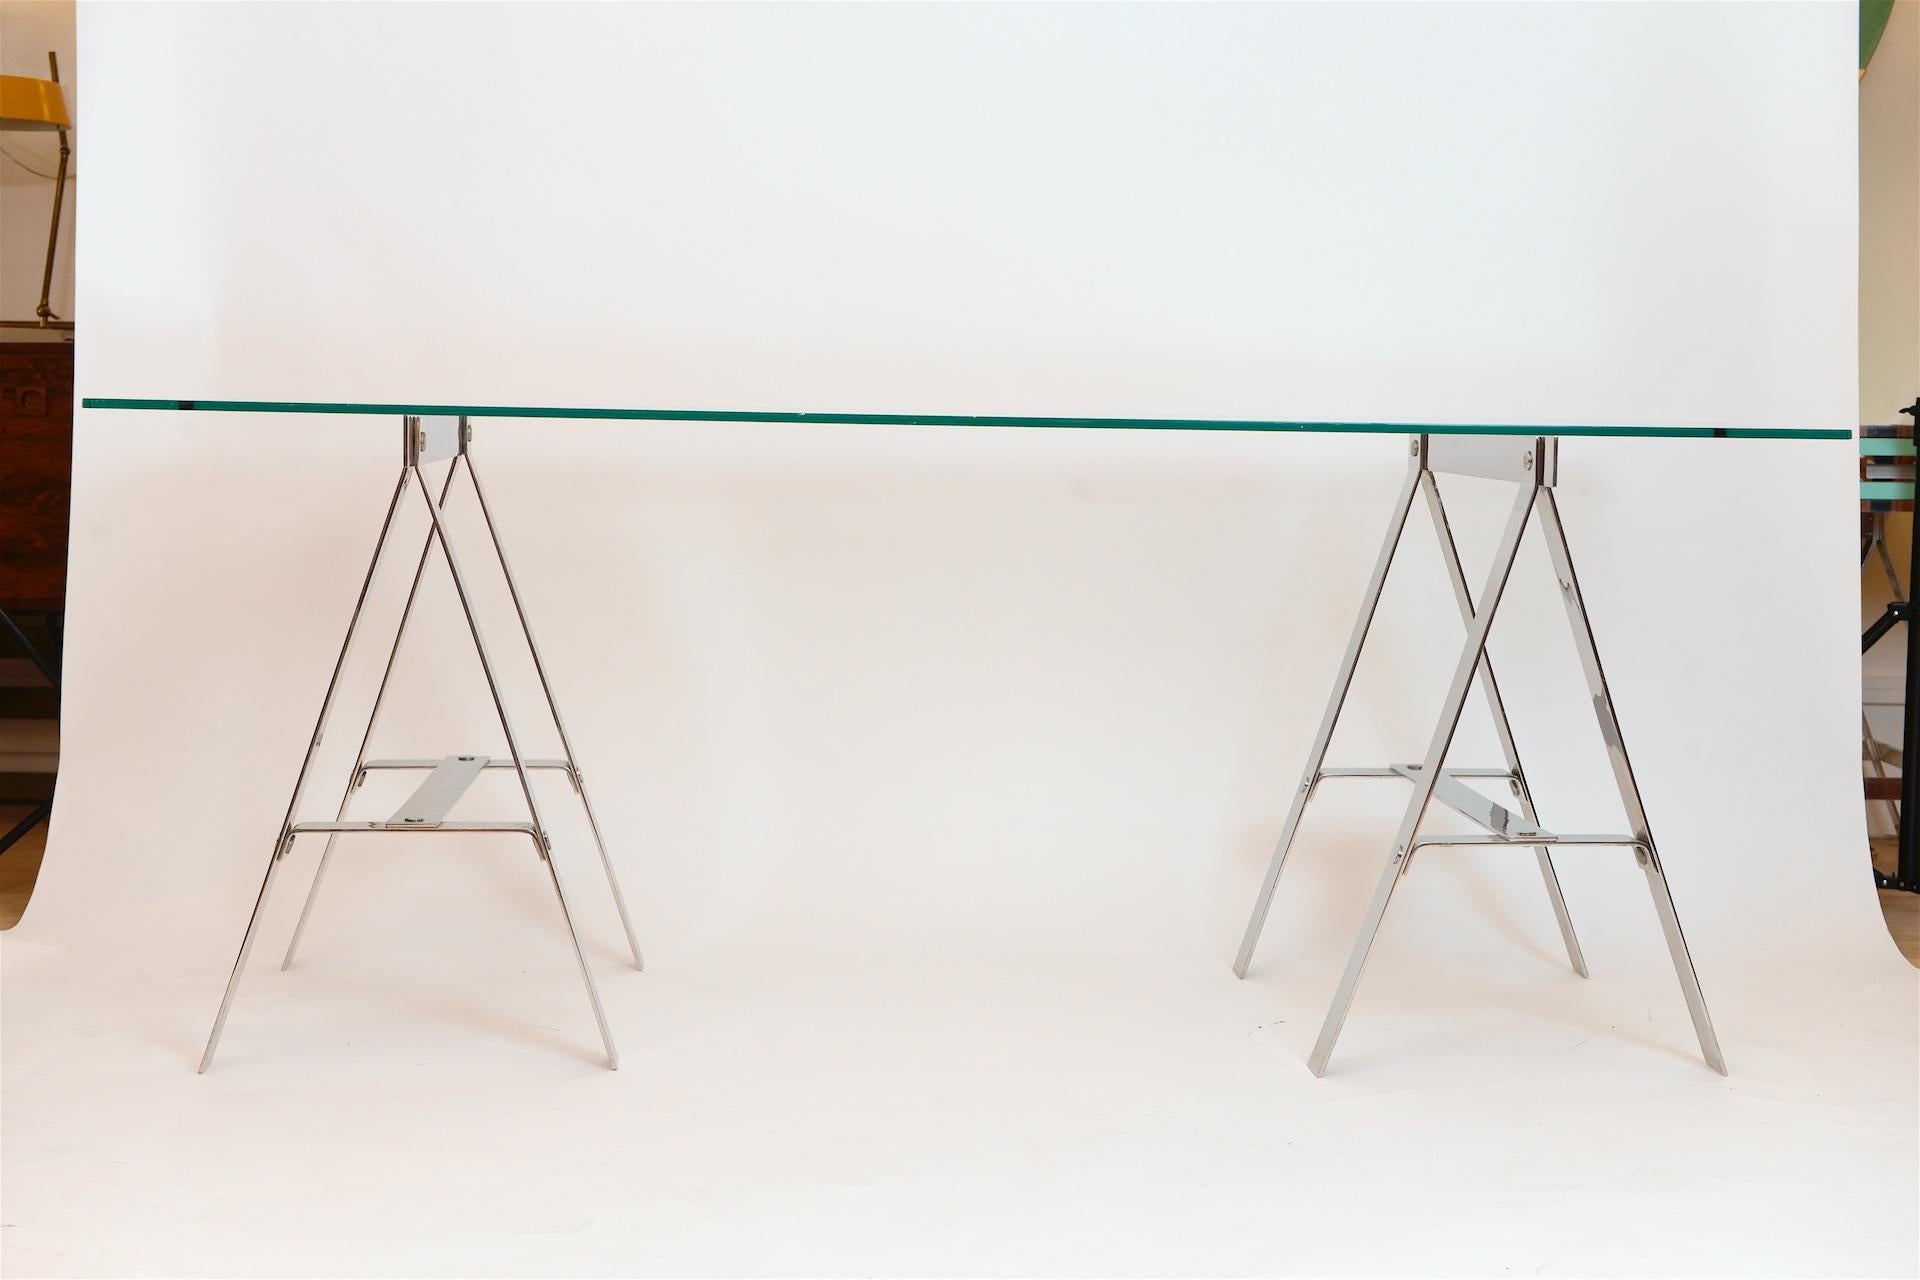 Minimalist midcentury chrome and glass trestle table, Italy, circa 1960

Can be shipped without glass

Glass has small chip to one side.